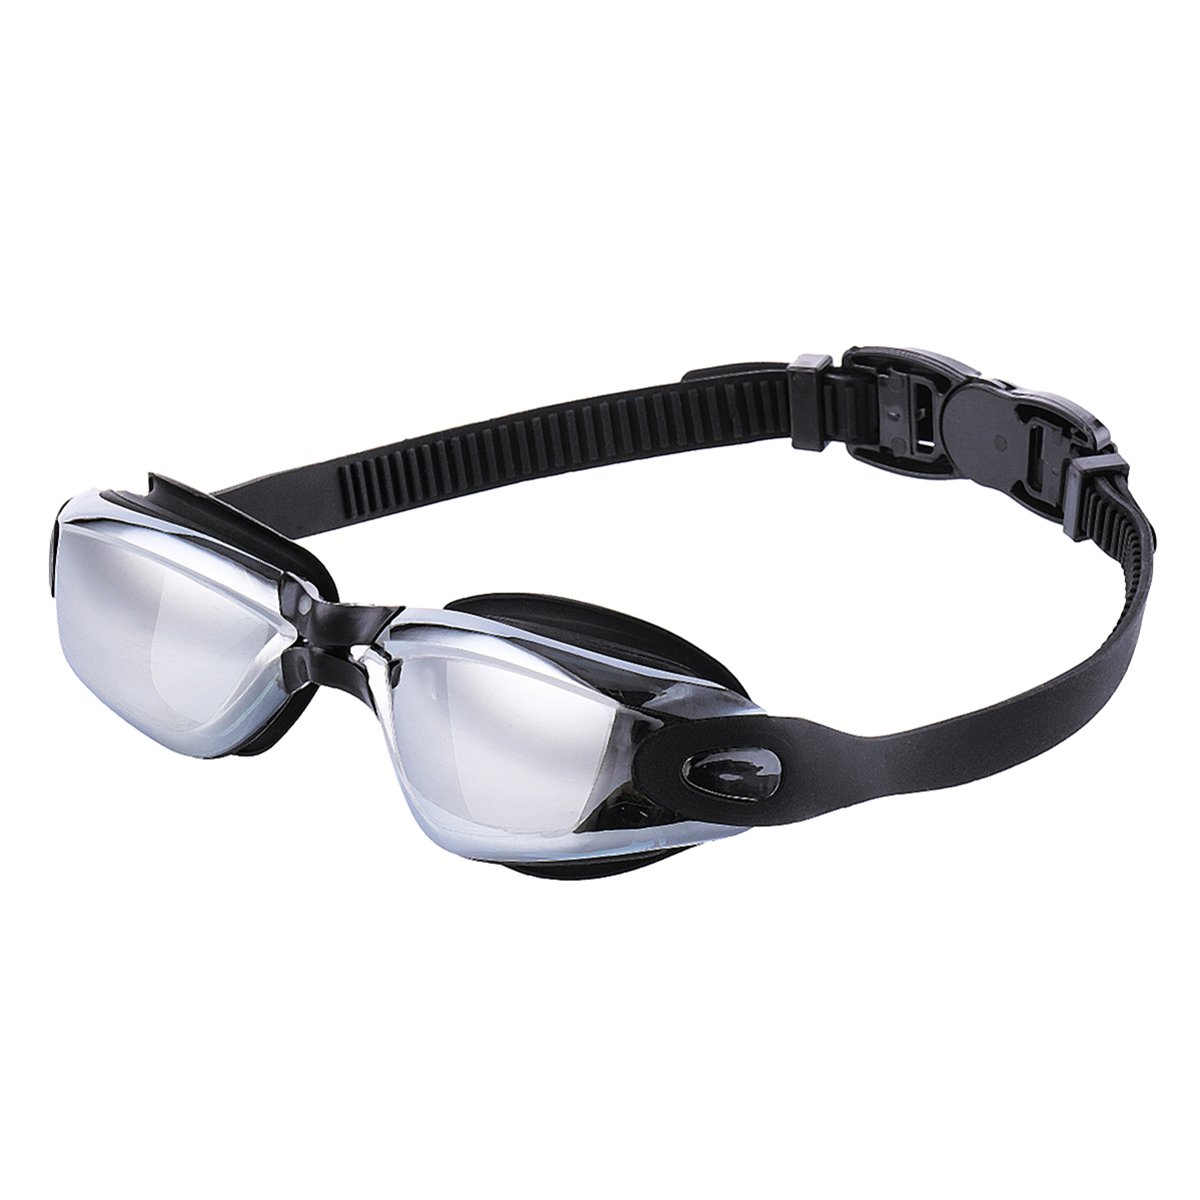 2Pair-Swimming-Goggles-with-Earplug-Nose-Rest-Transparent-Anti-UV-Anti-Fog-Protection-Goggles-for-Ad-1884483-9